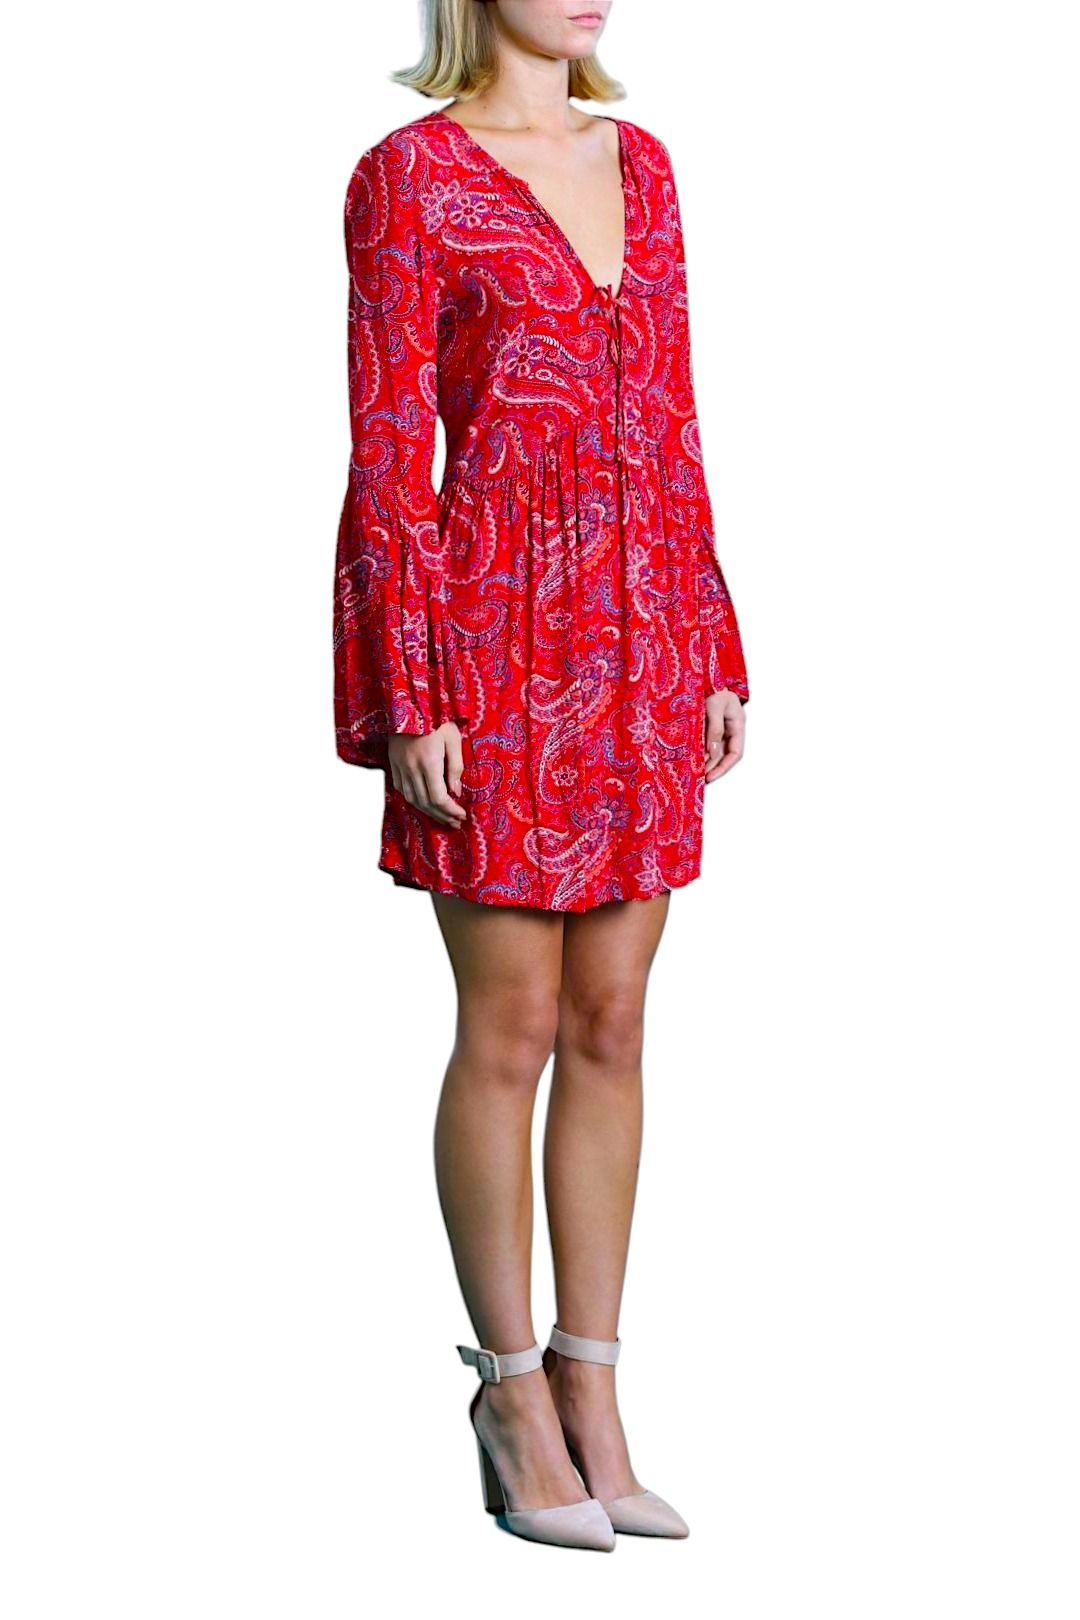 Tigerlily Mayfield Paisley Boho Relaxed Mini Dress Red